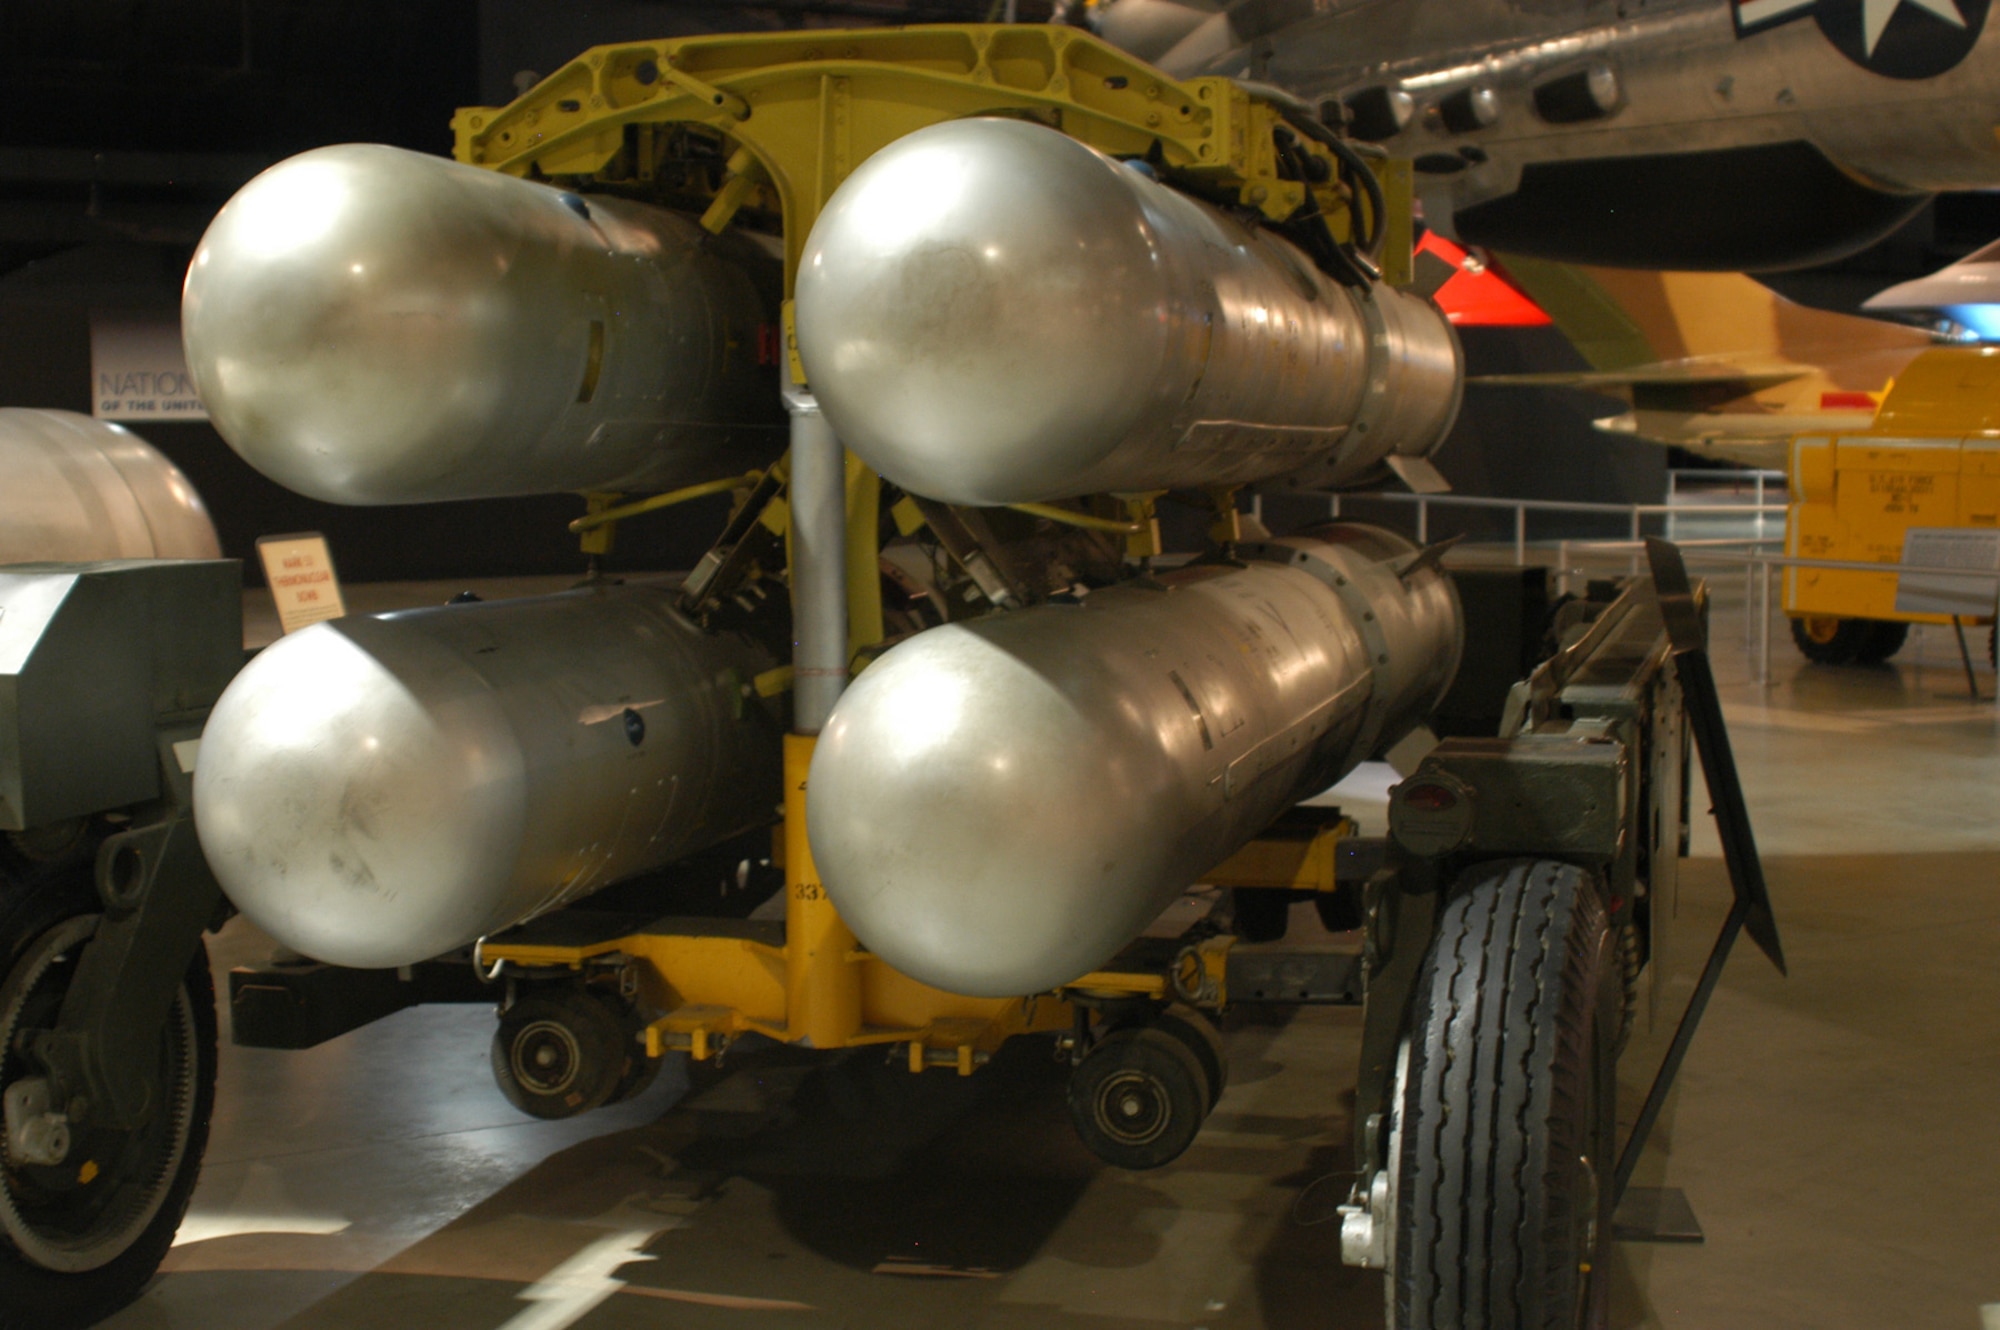 DAYTON, Ohio - Mark 28 Thermonuclear Bomb on display at the National Museum of the U.S. Air Force. (U.S. Air Force photo)